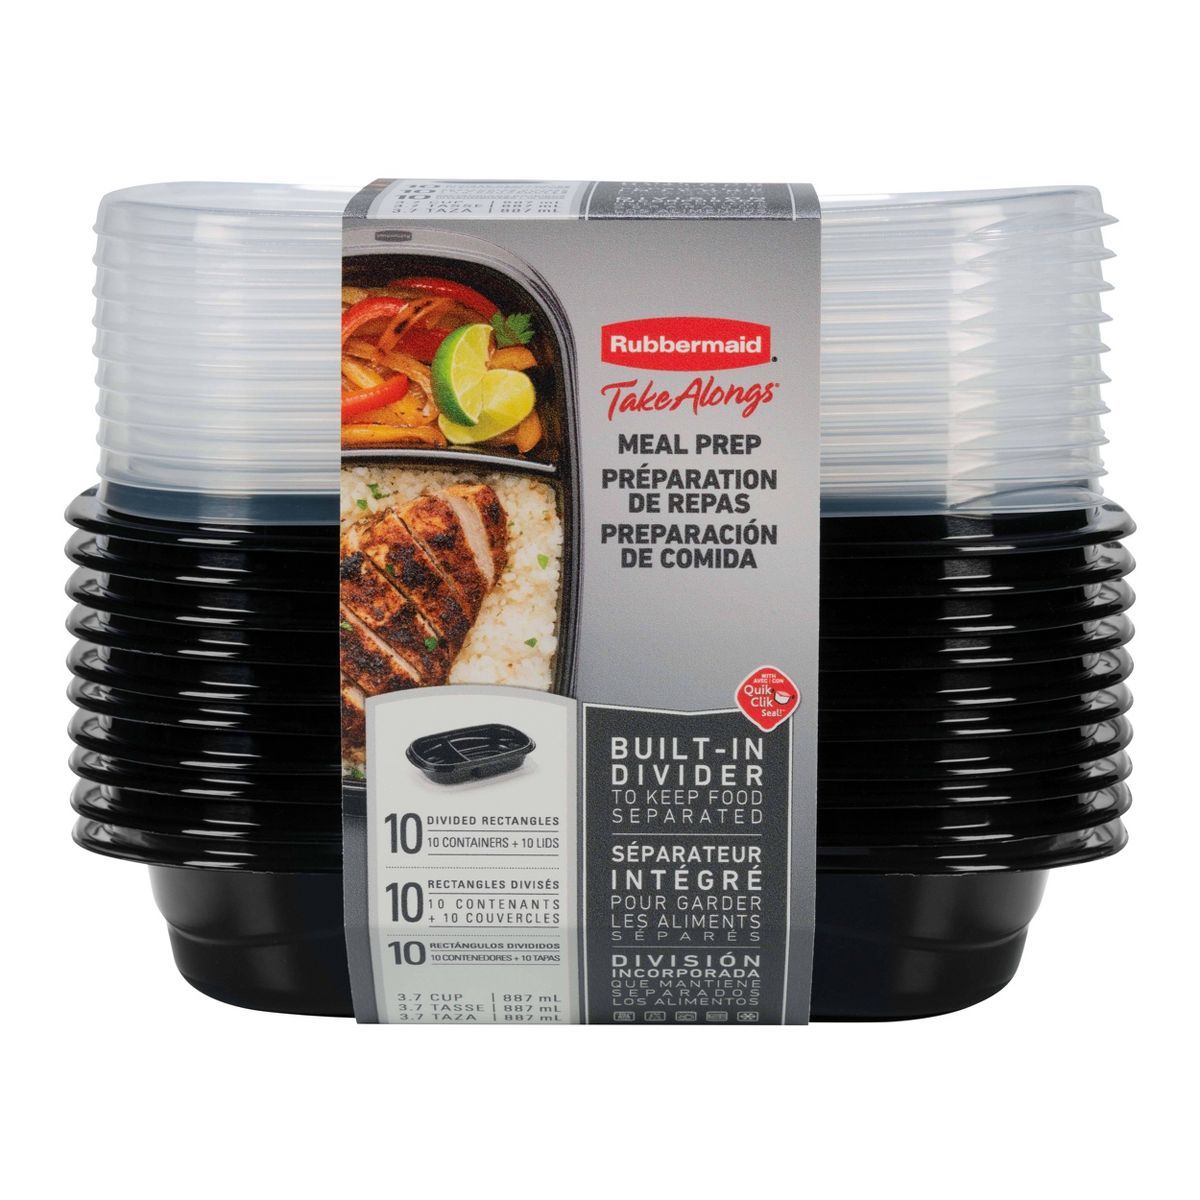 Rubbermaid 20pc TakeAlongs Meal Prep Divided Rectangle Containers Set | Target